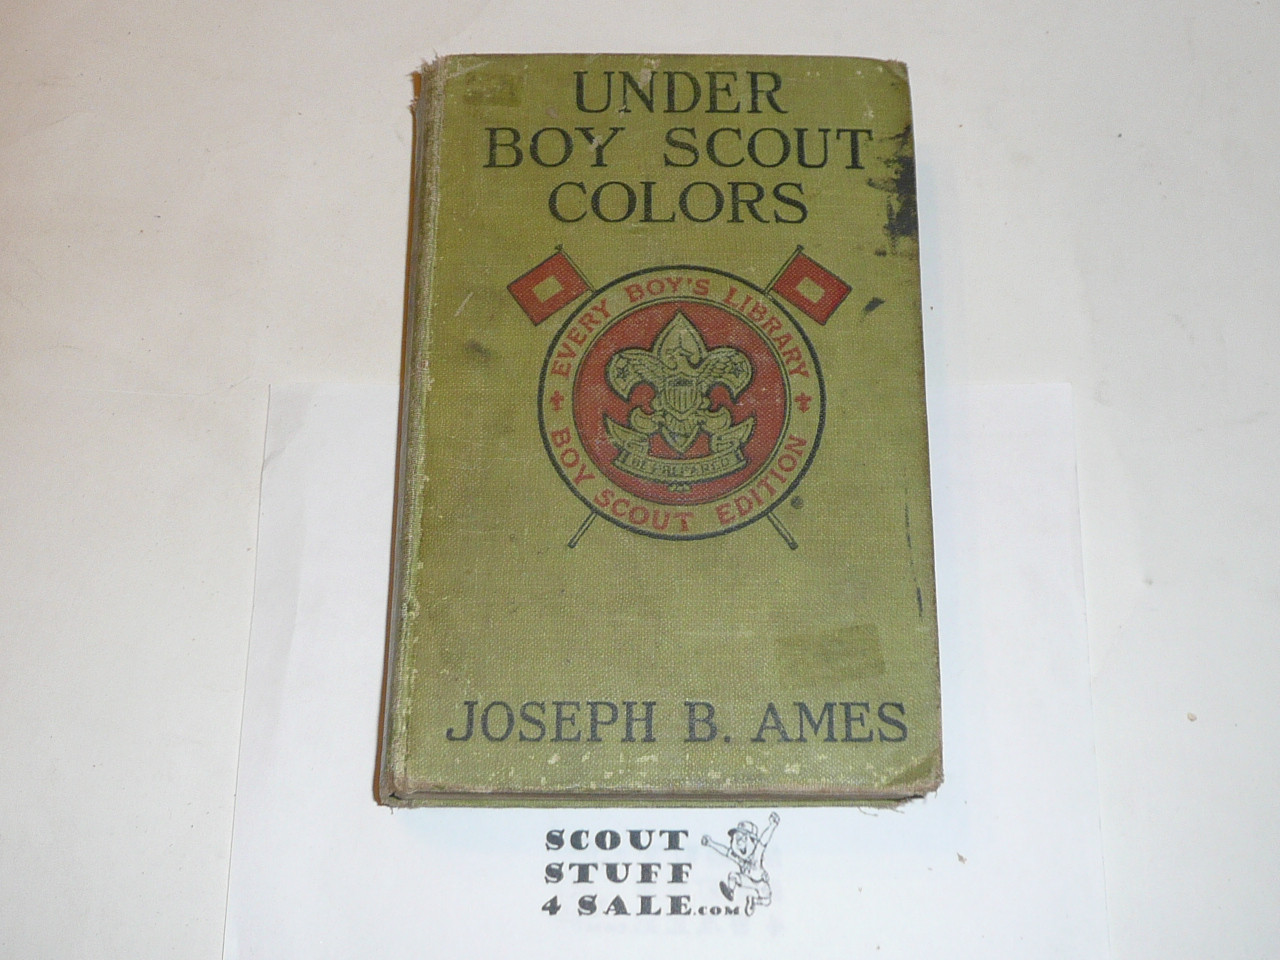 Under Boy Scout Colors, By Joseph B. Ames, 1917, Every Boy's Library Edition, Type Two Binding, worn